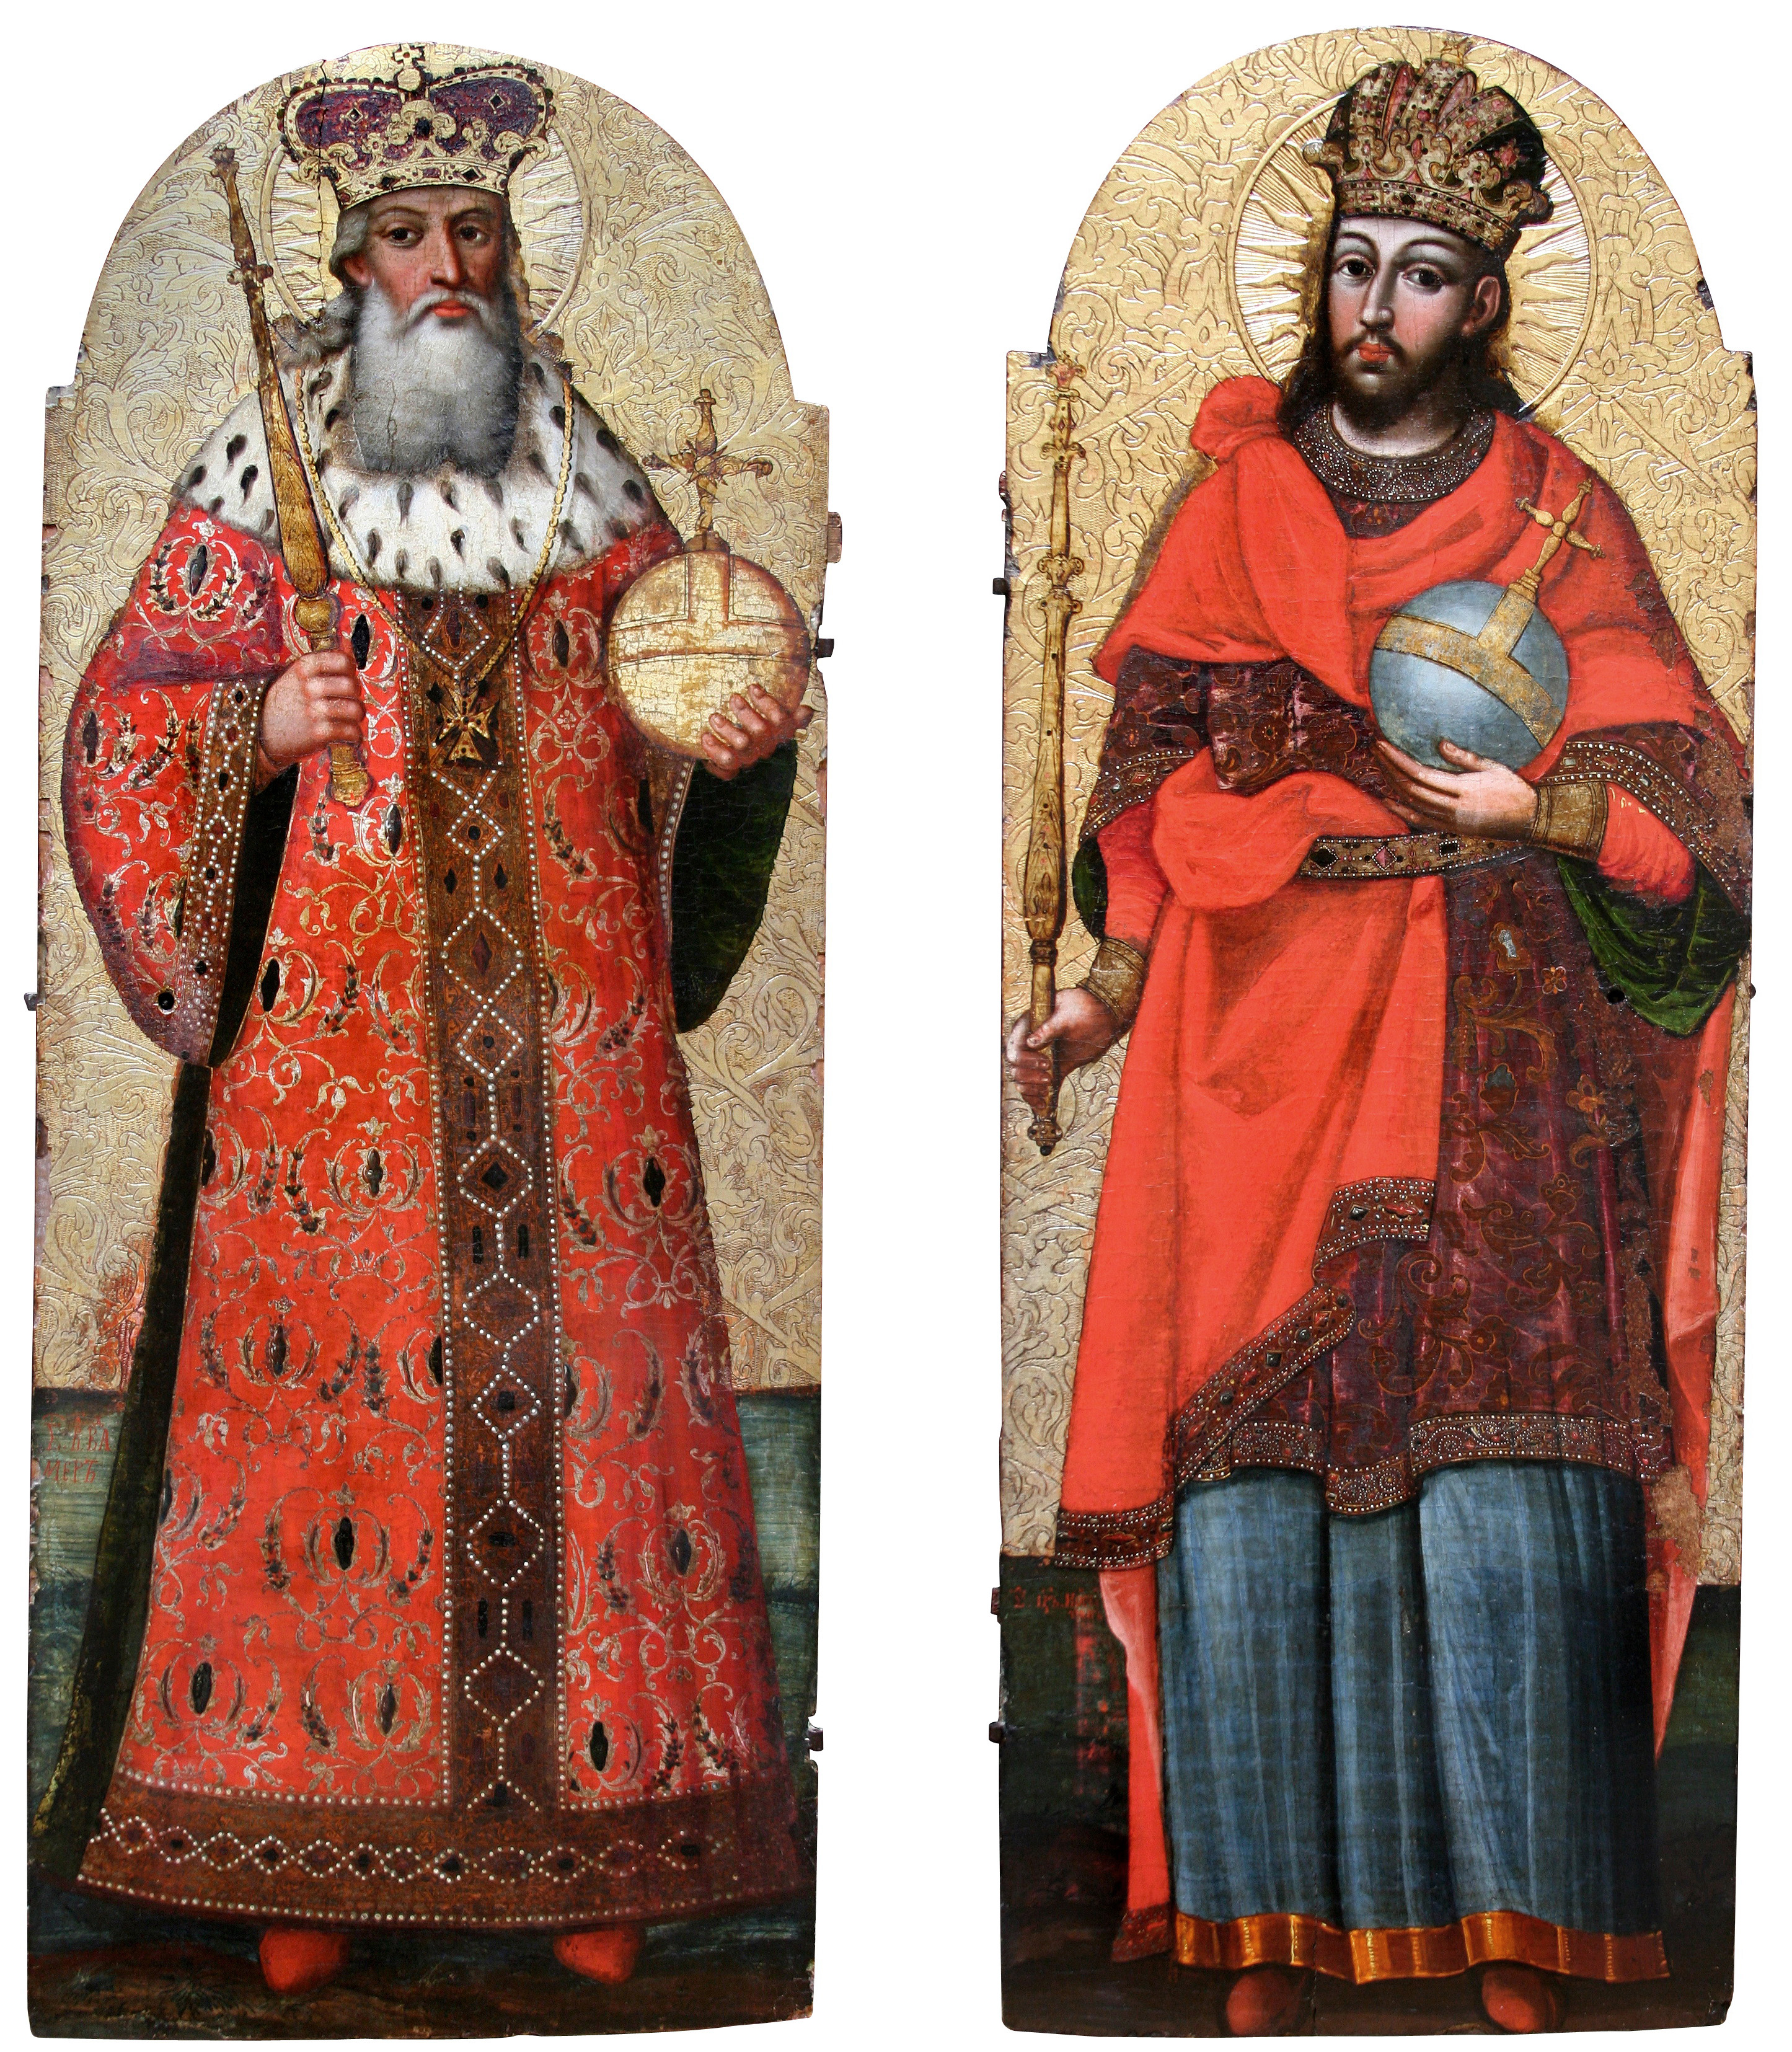 Ivan Rutkovych. Sts. Prince Volodymyr the Great and Emperor Constantine the Great. Icons from the Deësis tier of the Zhovkva iconostasis. 1697–99. Andrei Sheptytskyi National Museum in Lviv (source: Andrei Sheptytskyi National Museum in Lviv).